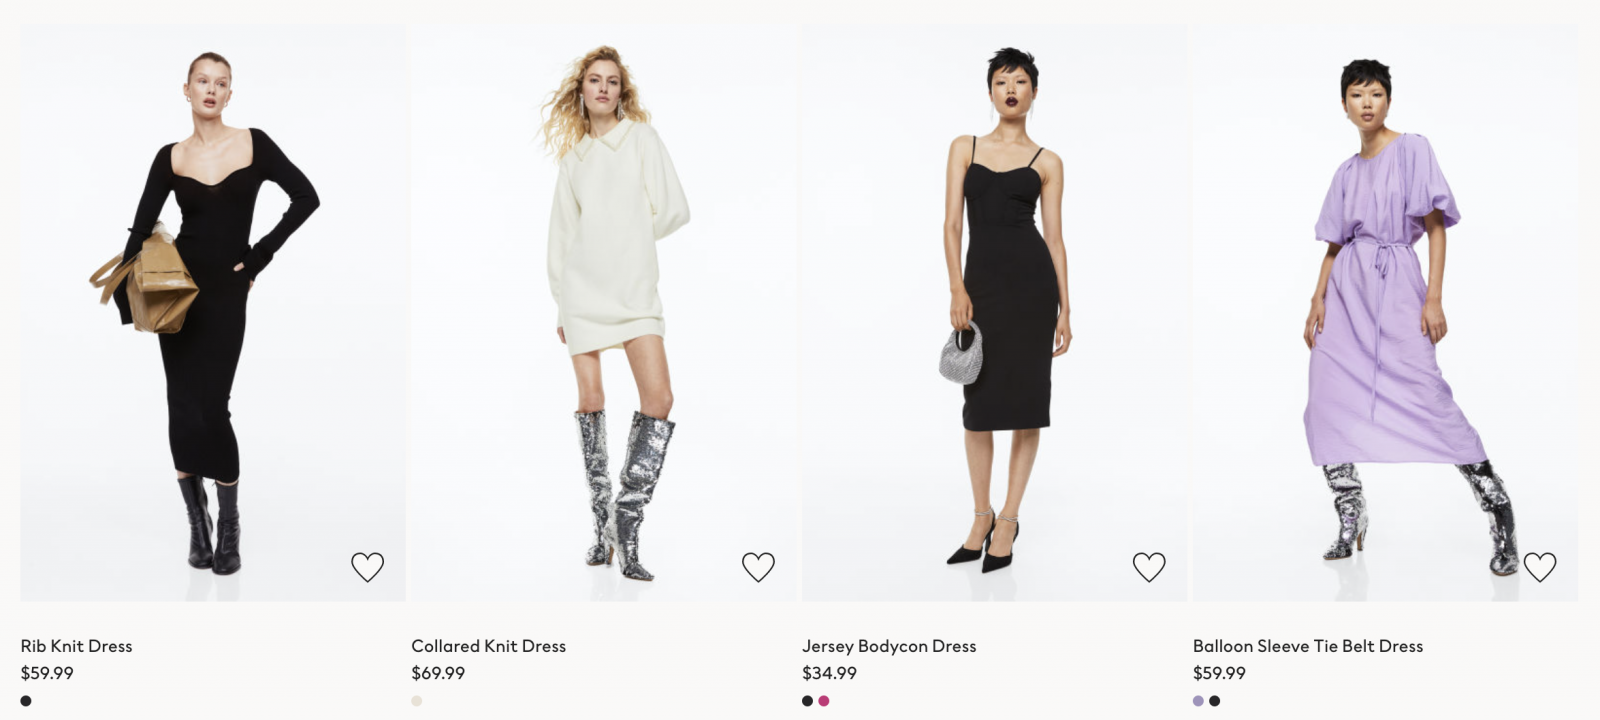 Save on H&M dresses with our H&M discount codes and coupons